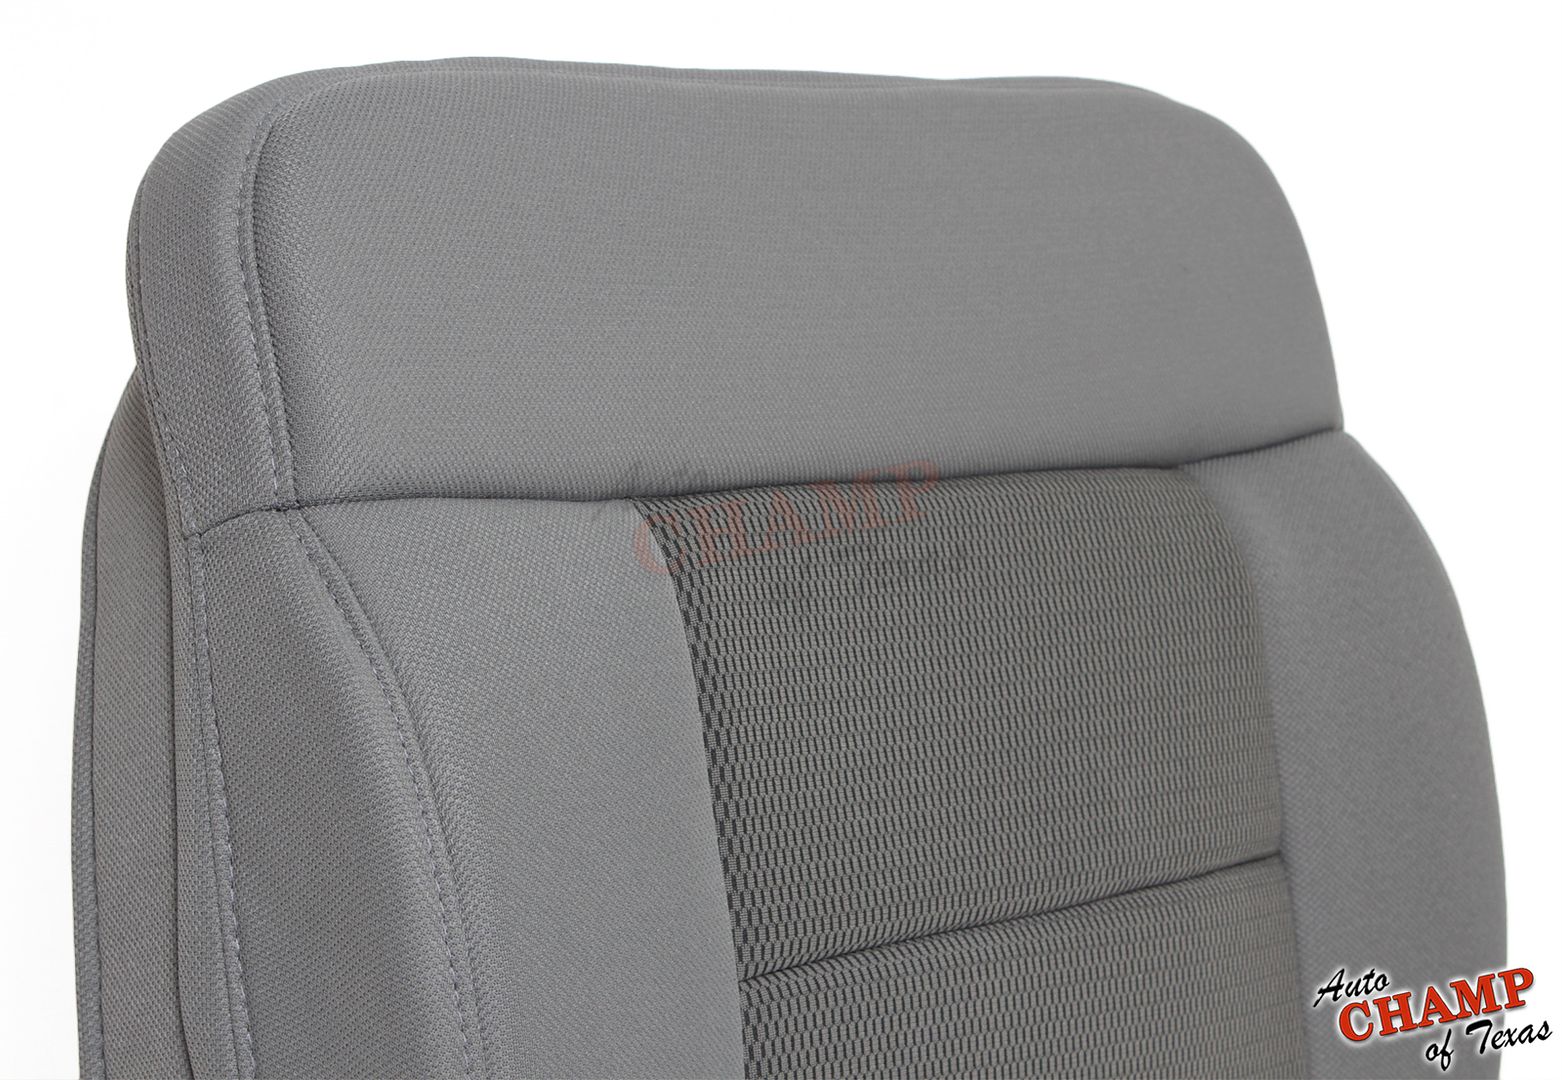 2004 2005 2006 Ford F150 XLT F150 Driver Side Bottom Cloth Seat Cover Gray eBay